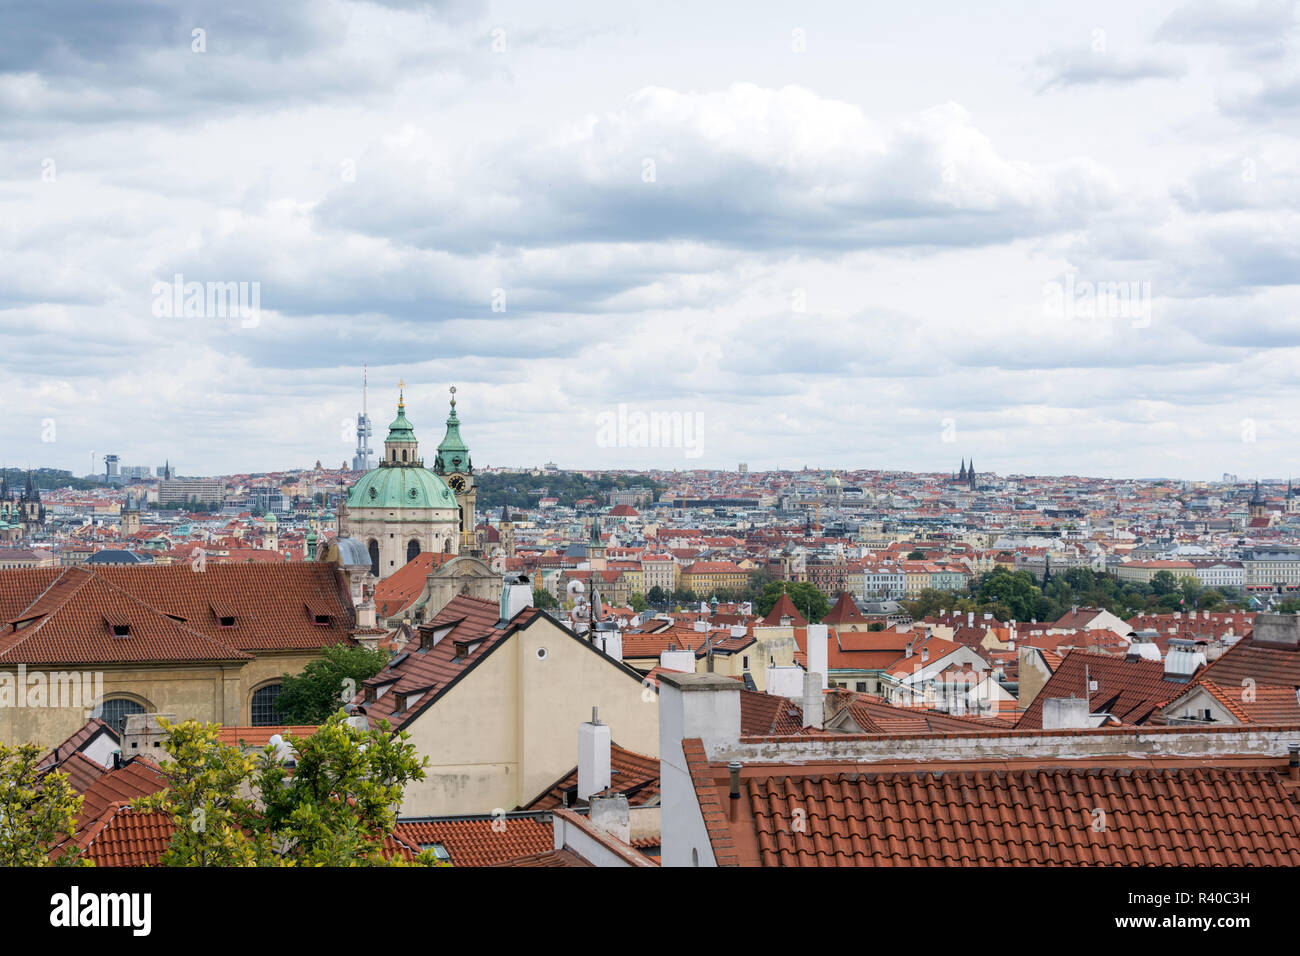 Prague panorama with colorful rooftops on a cloudy day, with The Church of St. Nicholas and Zizkov television tower in the distance Stock Photo